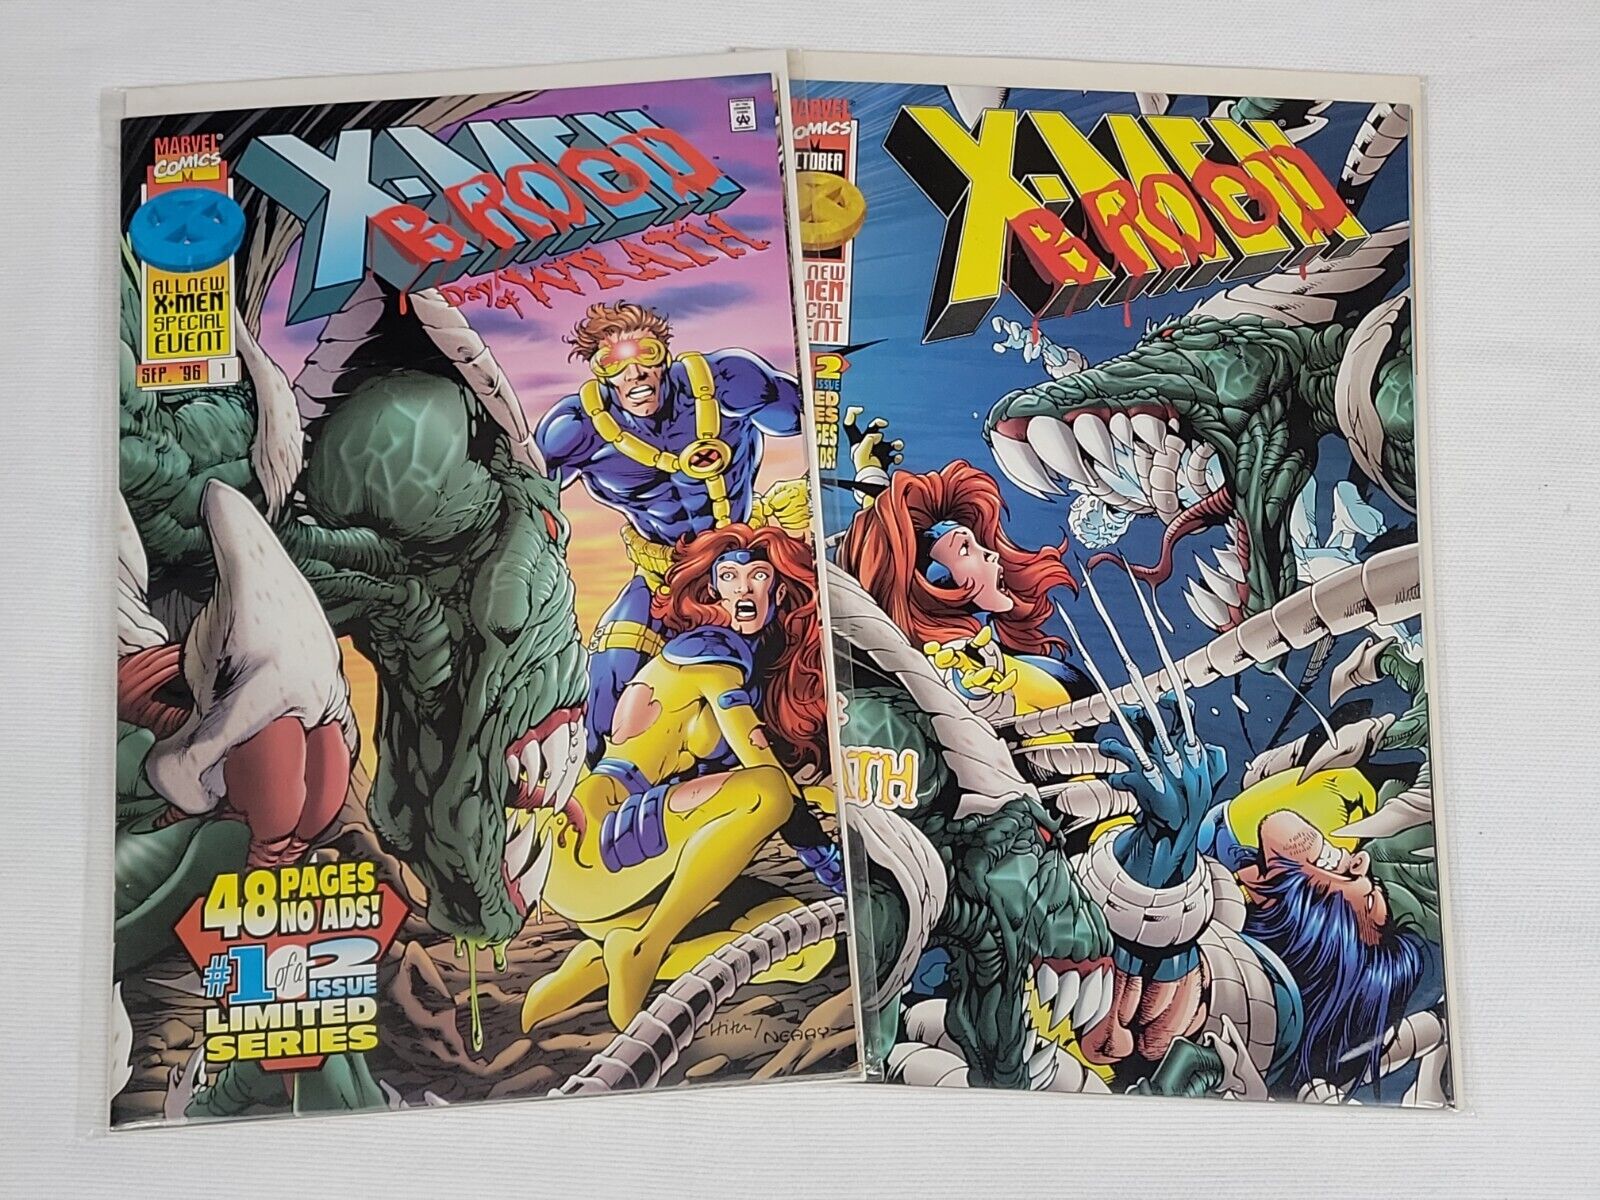 X-Men / Brood: Day Of Wrath # 1, 2 - Marvel Comics - 2 Issue Lot